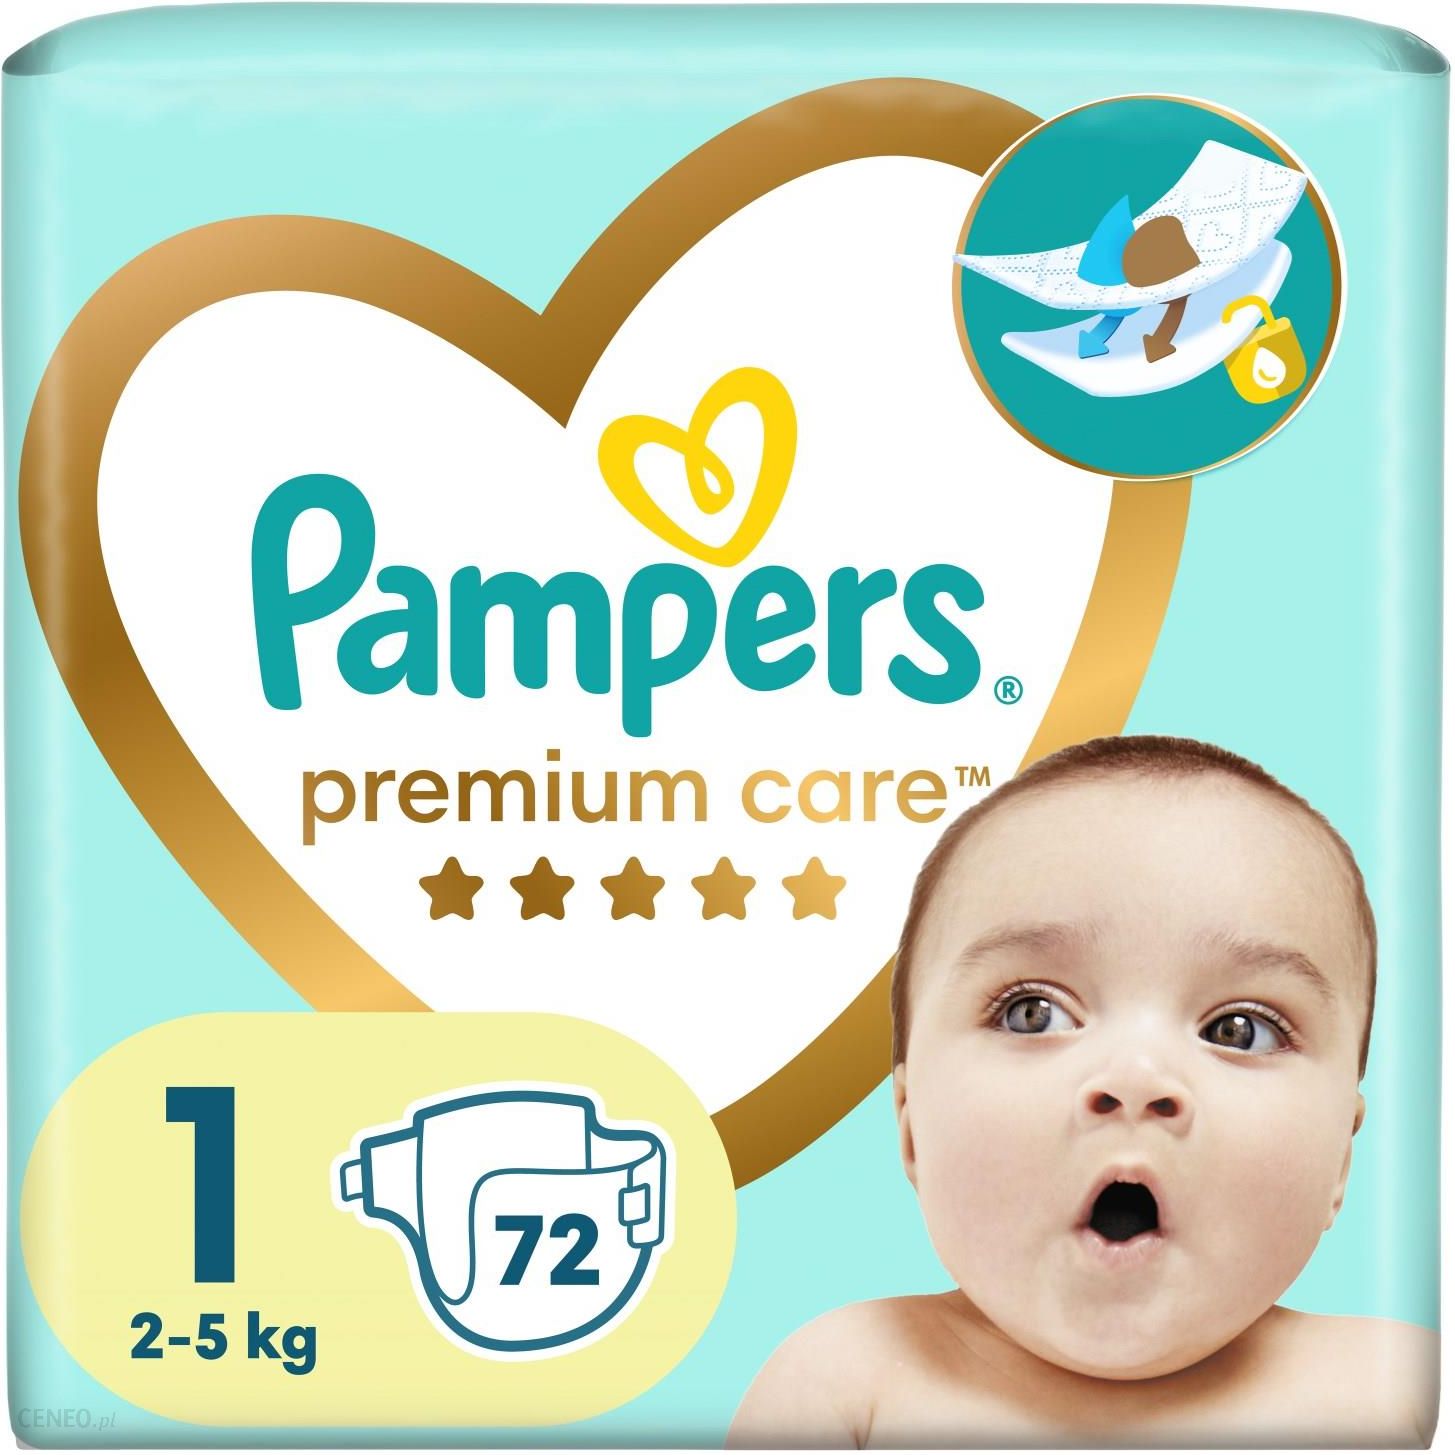 pampers activr baby dry